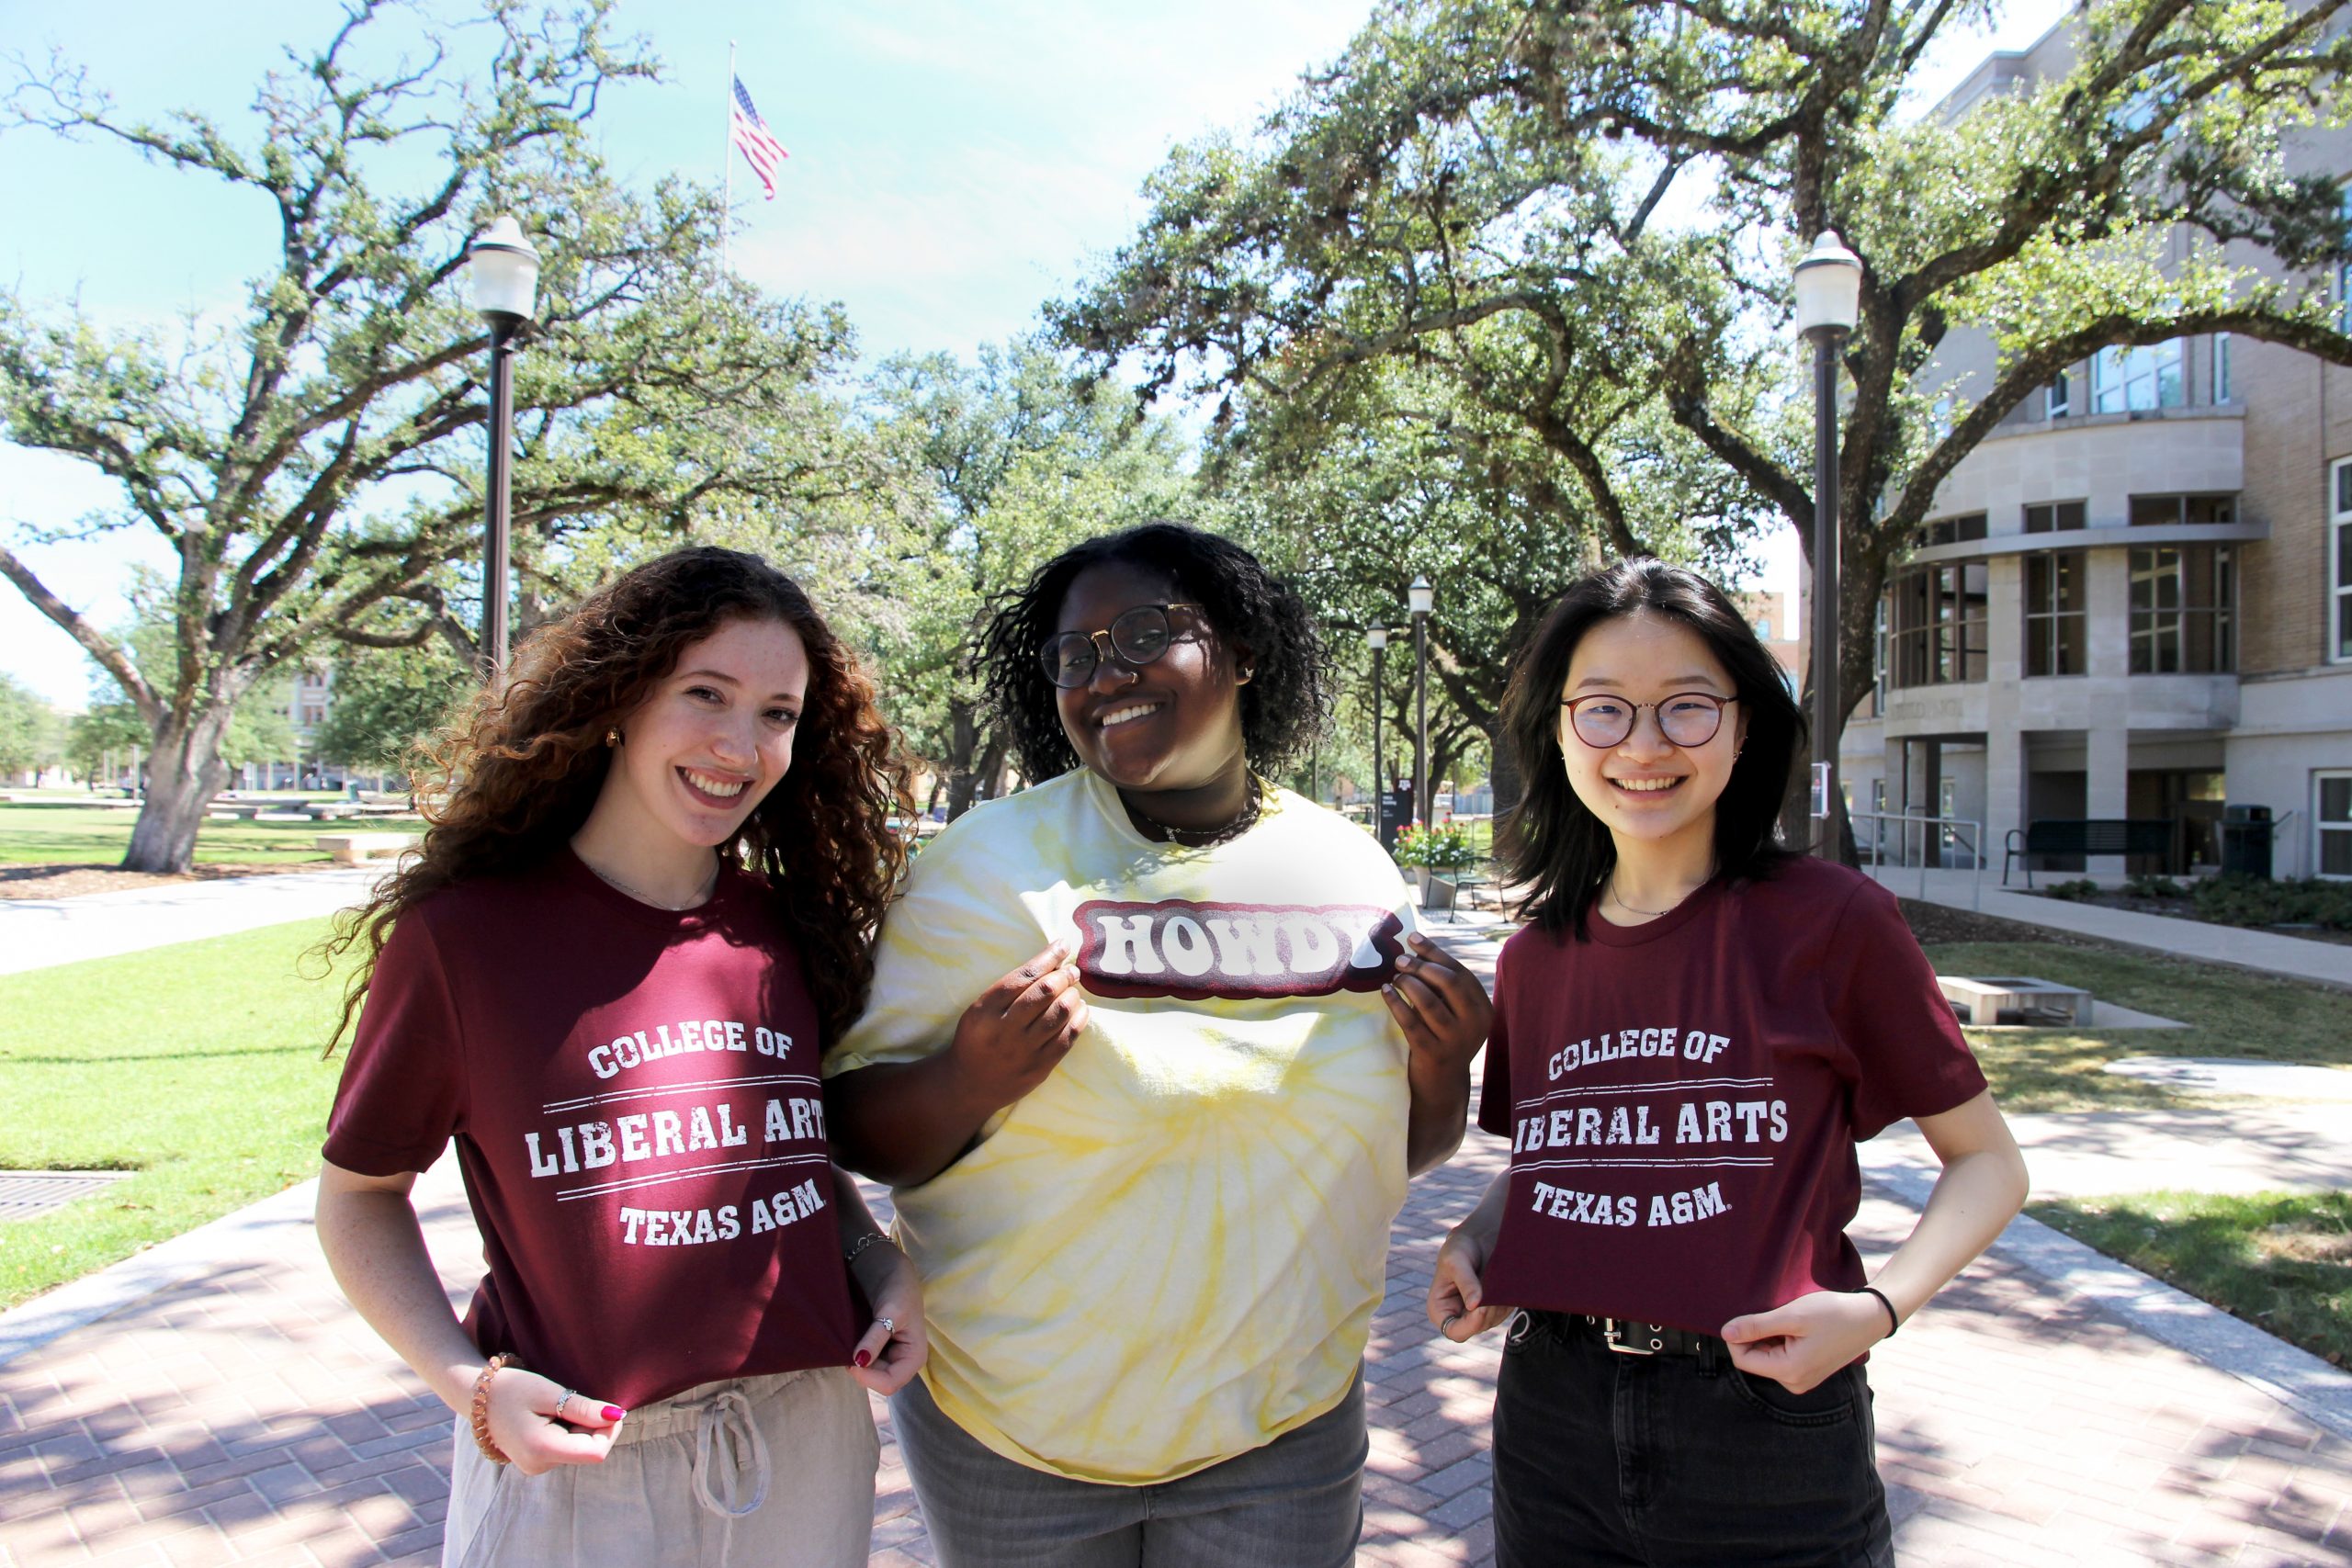 Stella and two friends pause for a photo to show off their College of Liberal Arts t-shirts.